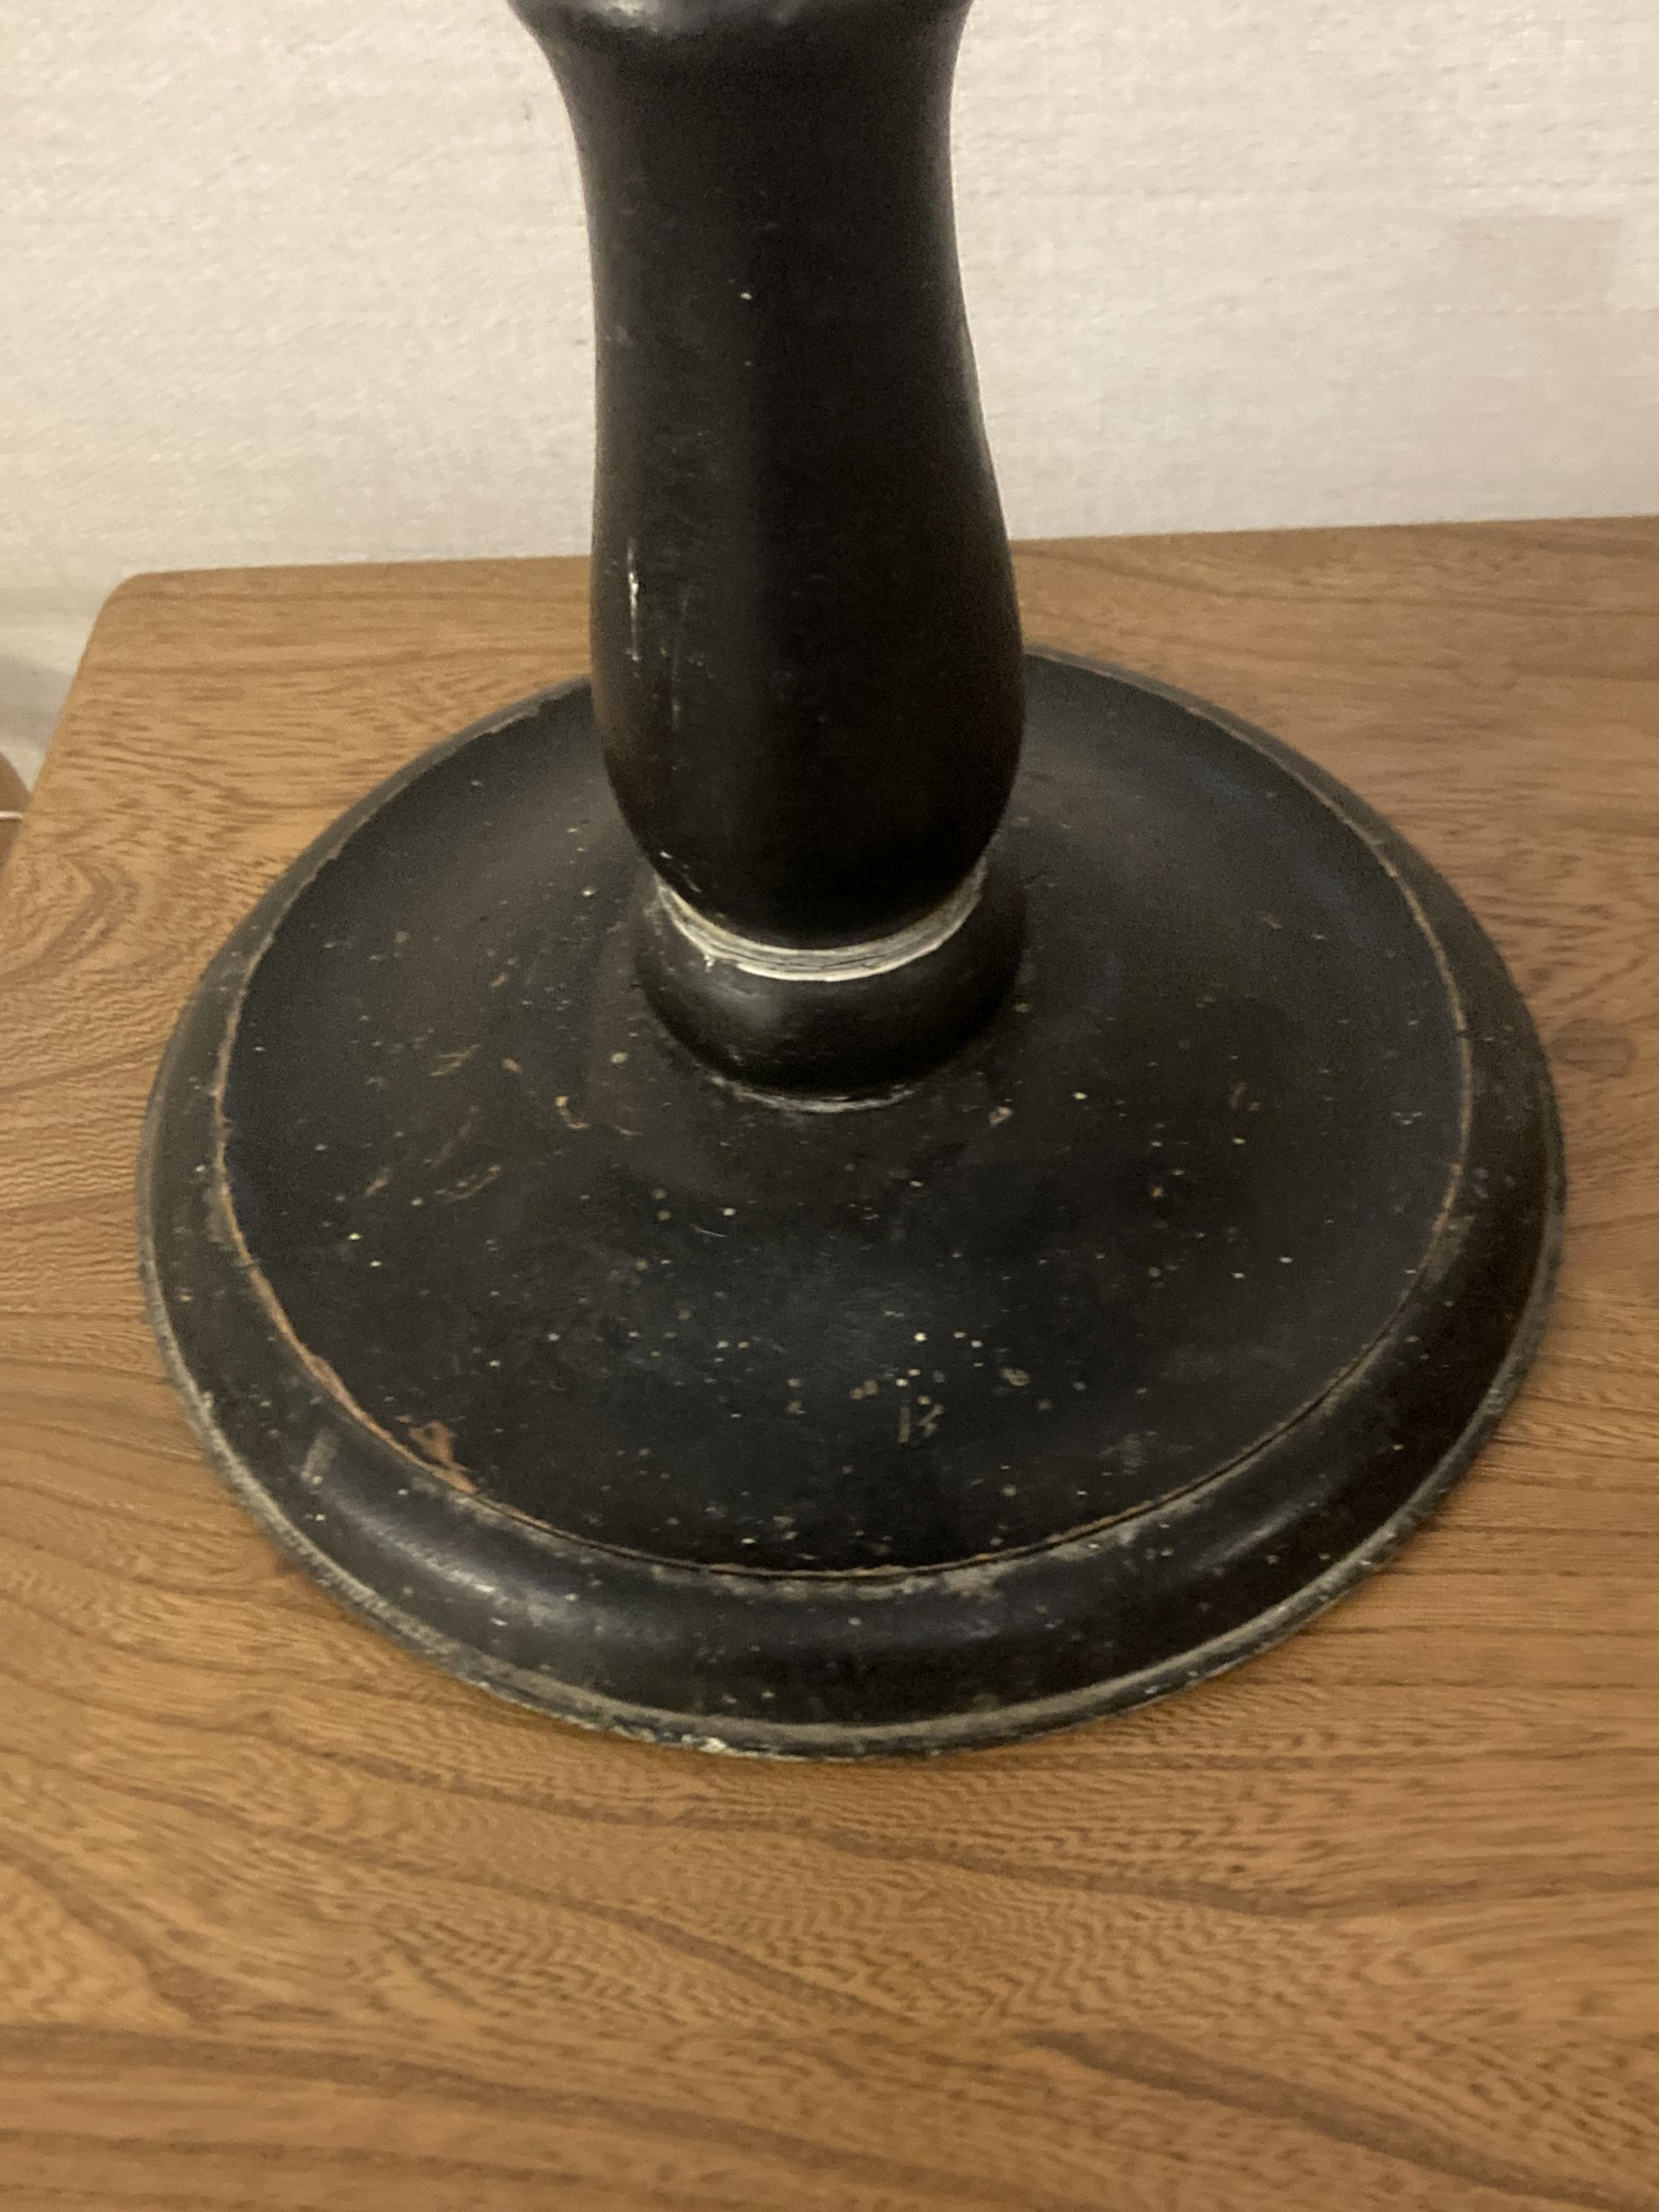 A painted turned wood pricket candlestick, height 75cm